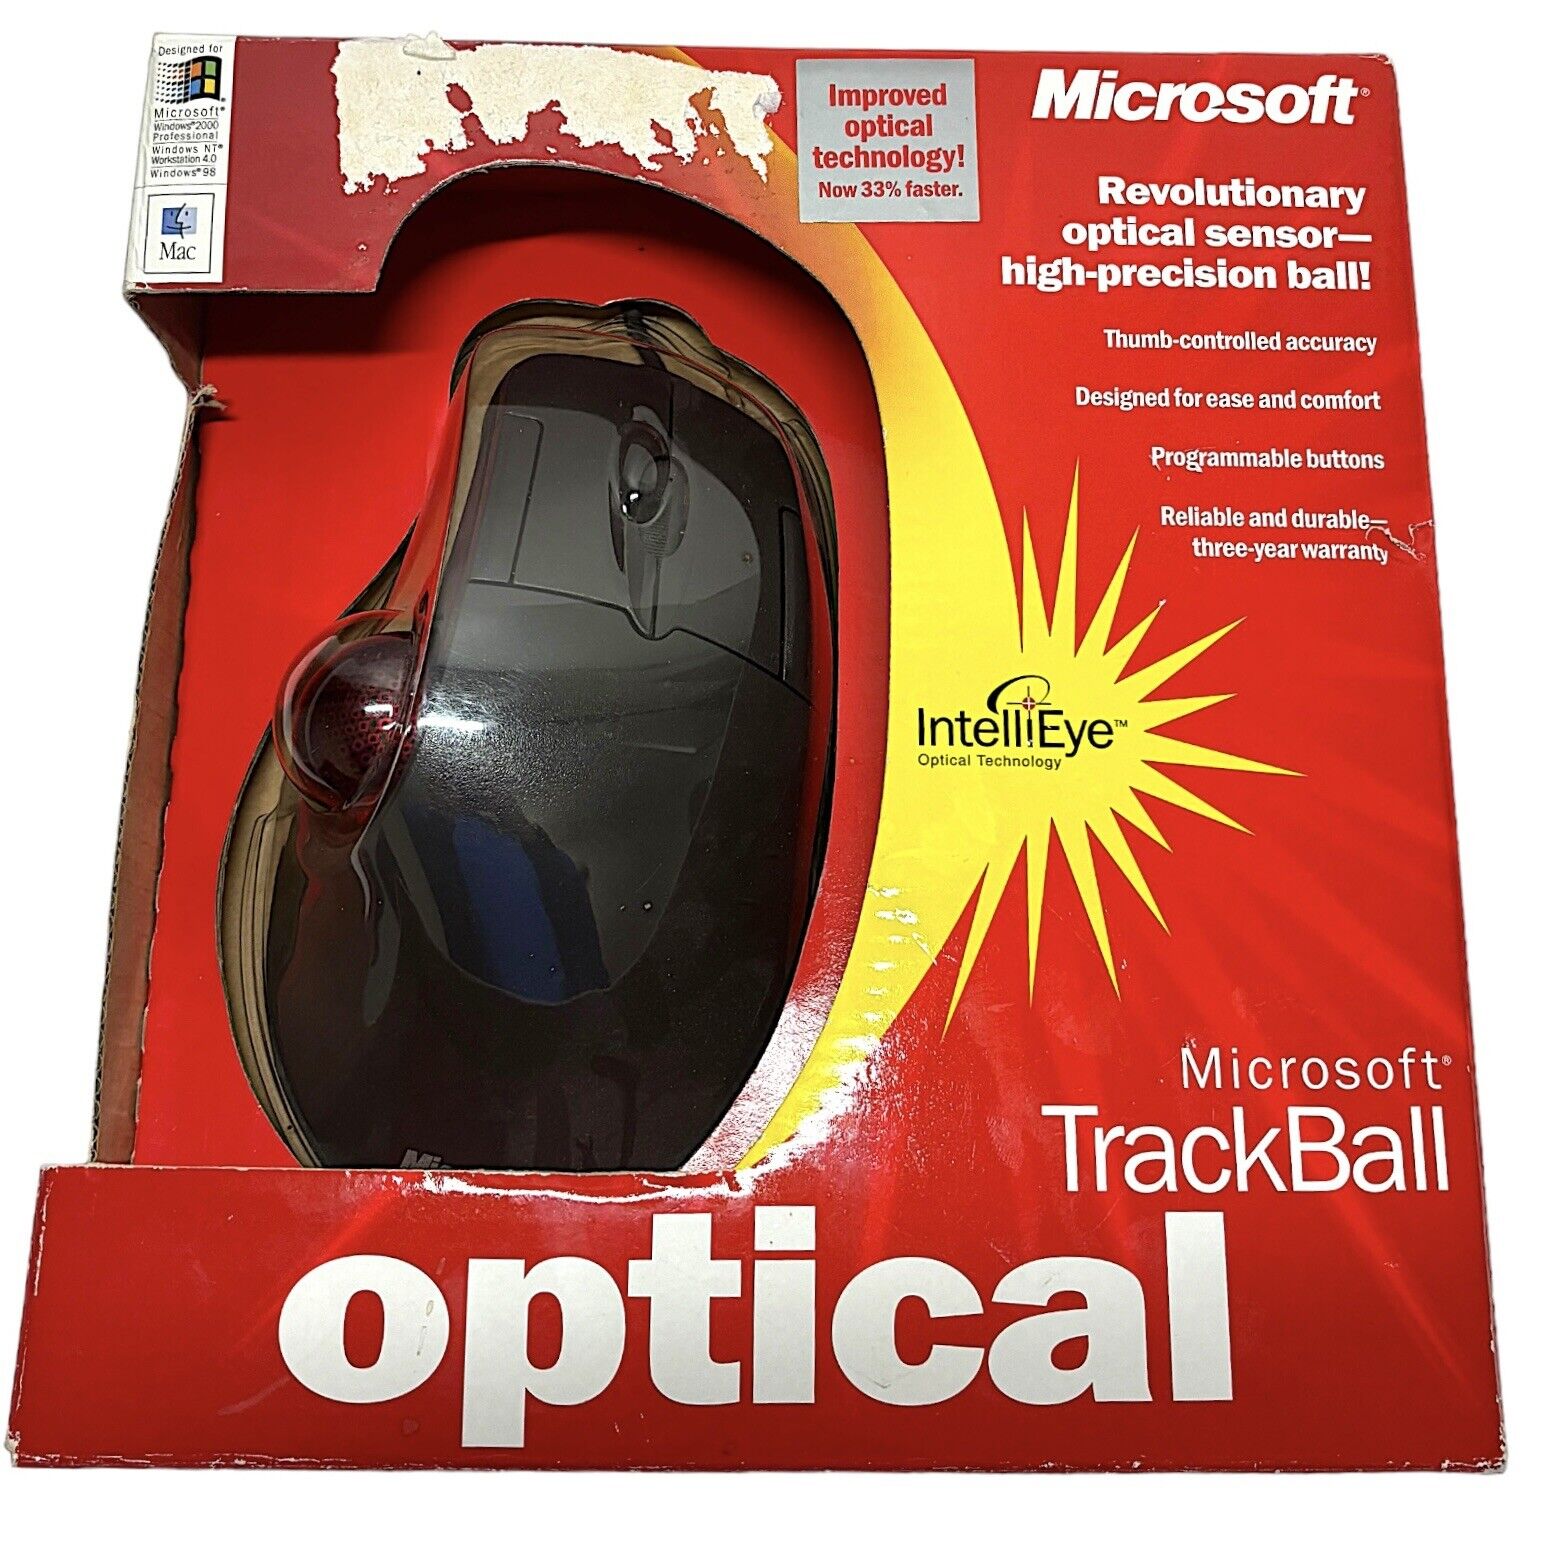 Microsoft Trackball Optical Mouse Rare D67-00001 (X05-42214) Barely Used Tested